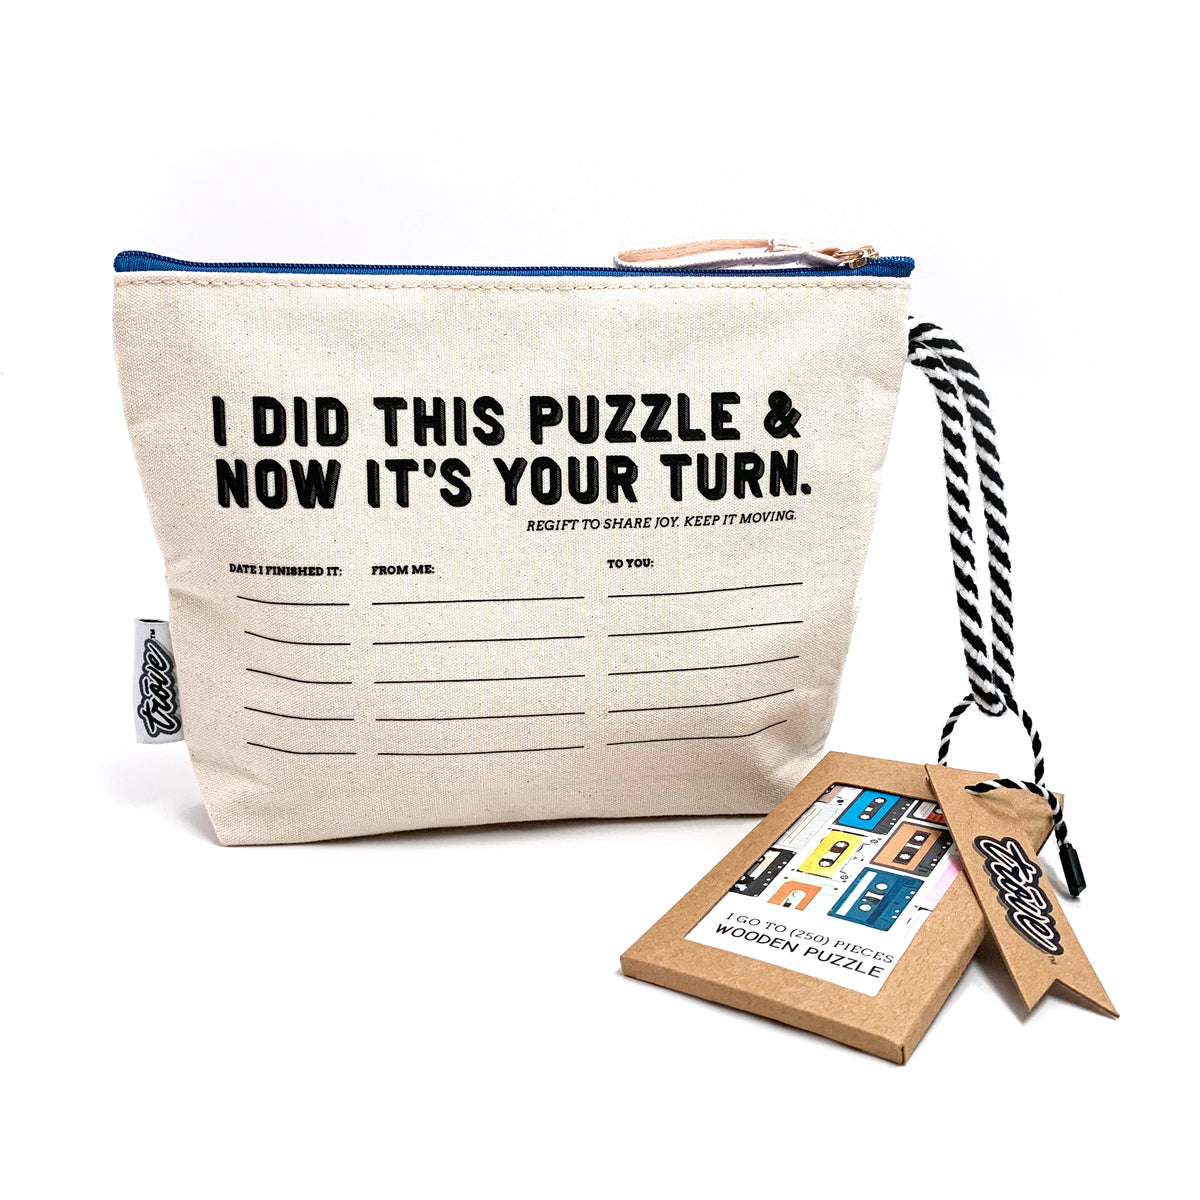 Bags and maps to store your puzzle - Puzzles123